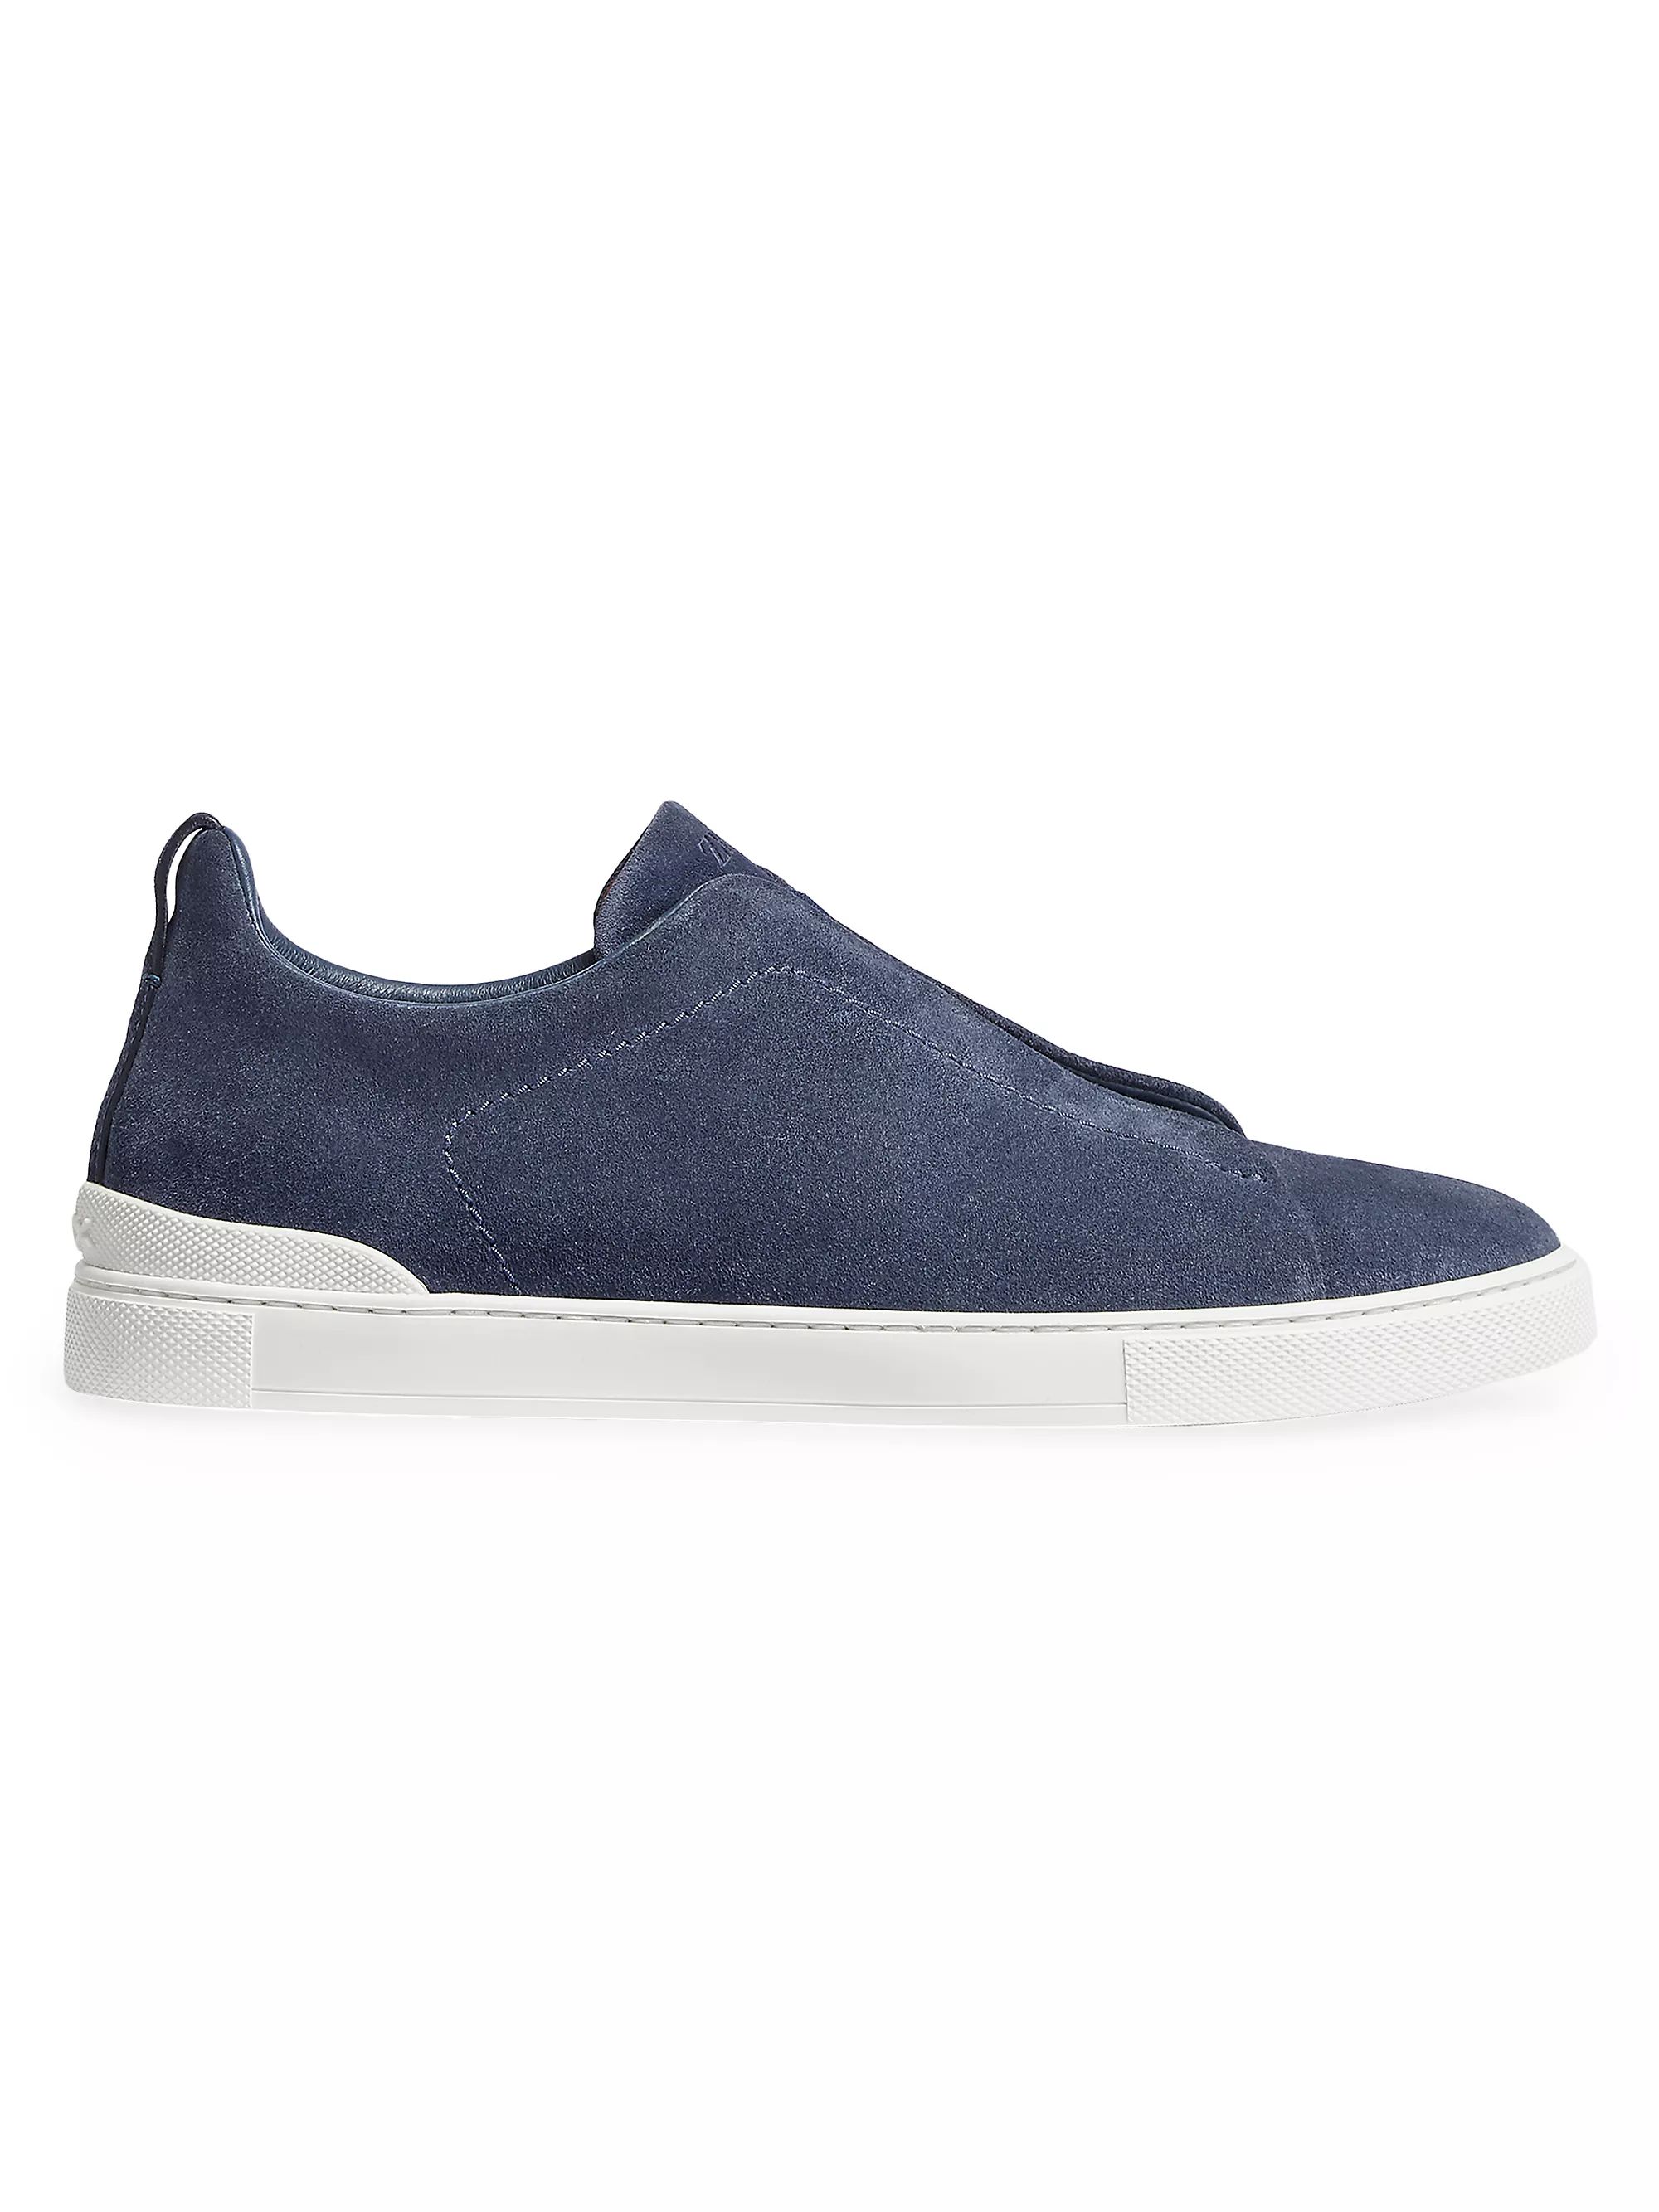 Triple Stitch Suede Low-Top Sneakers | Saks Fifth Avenue